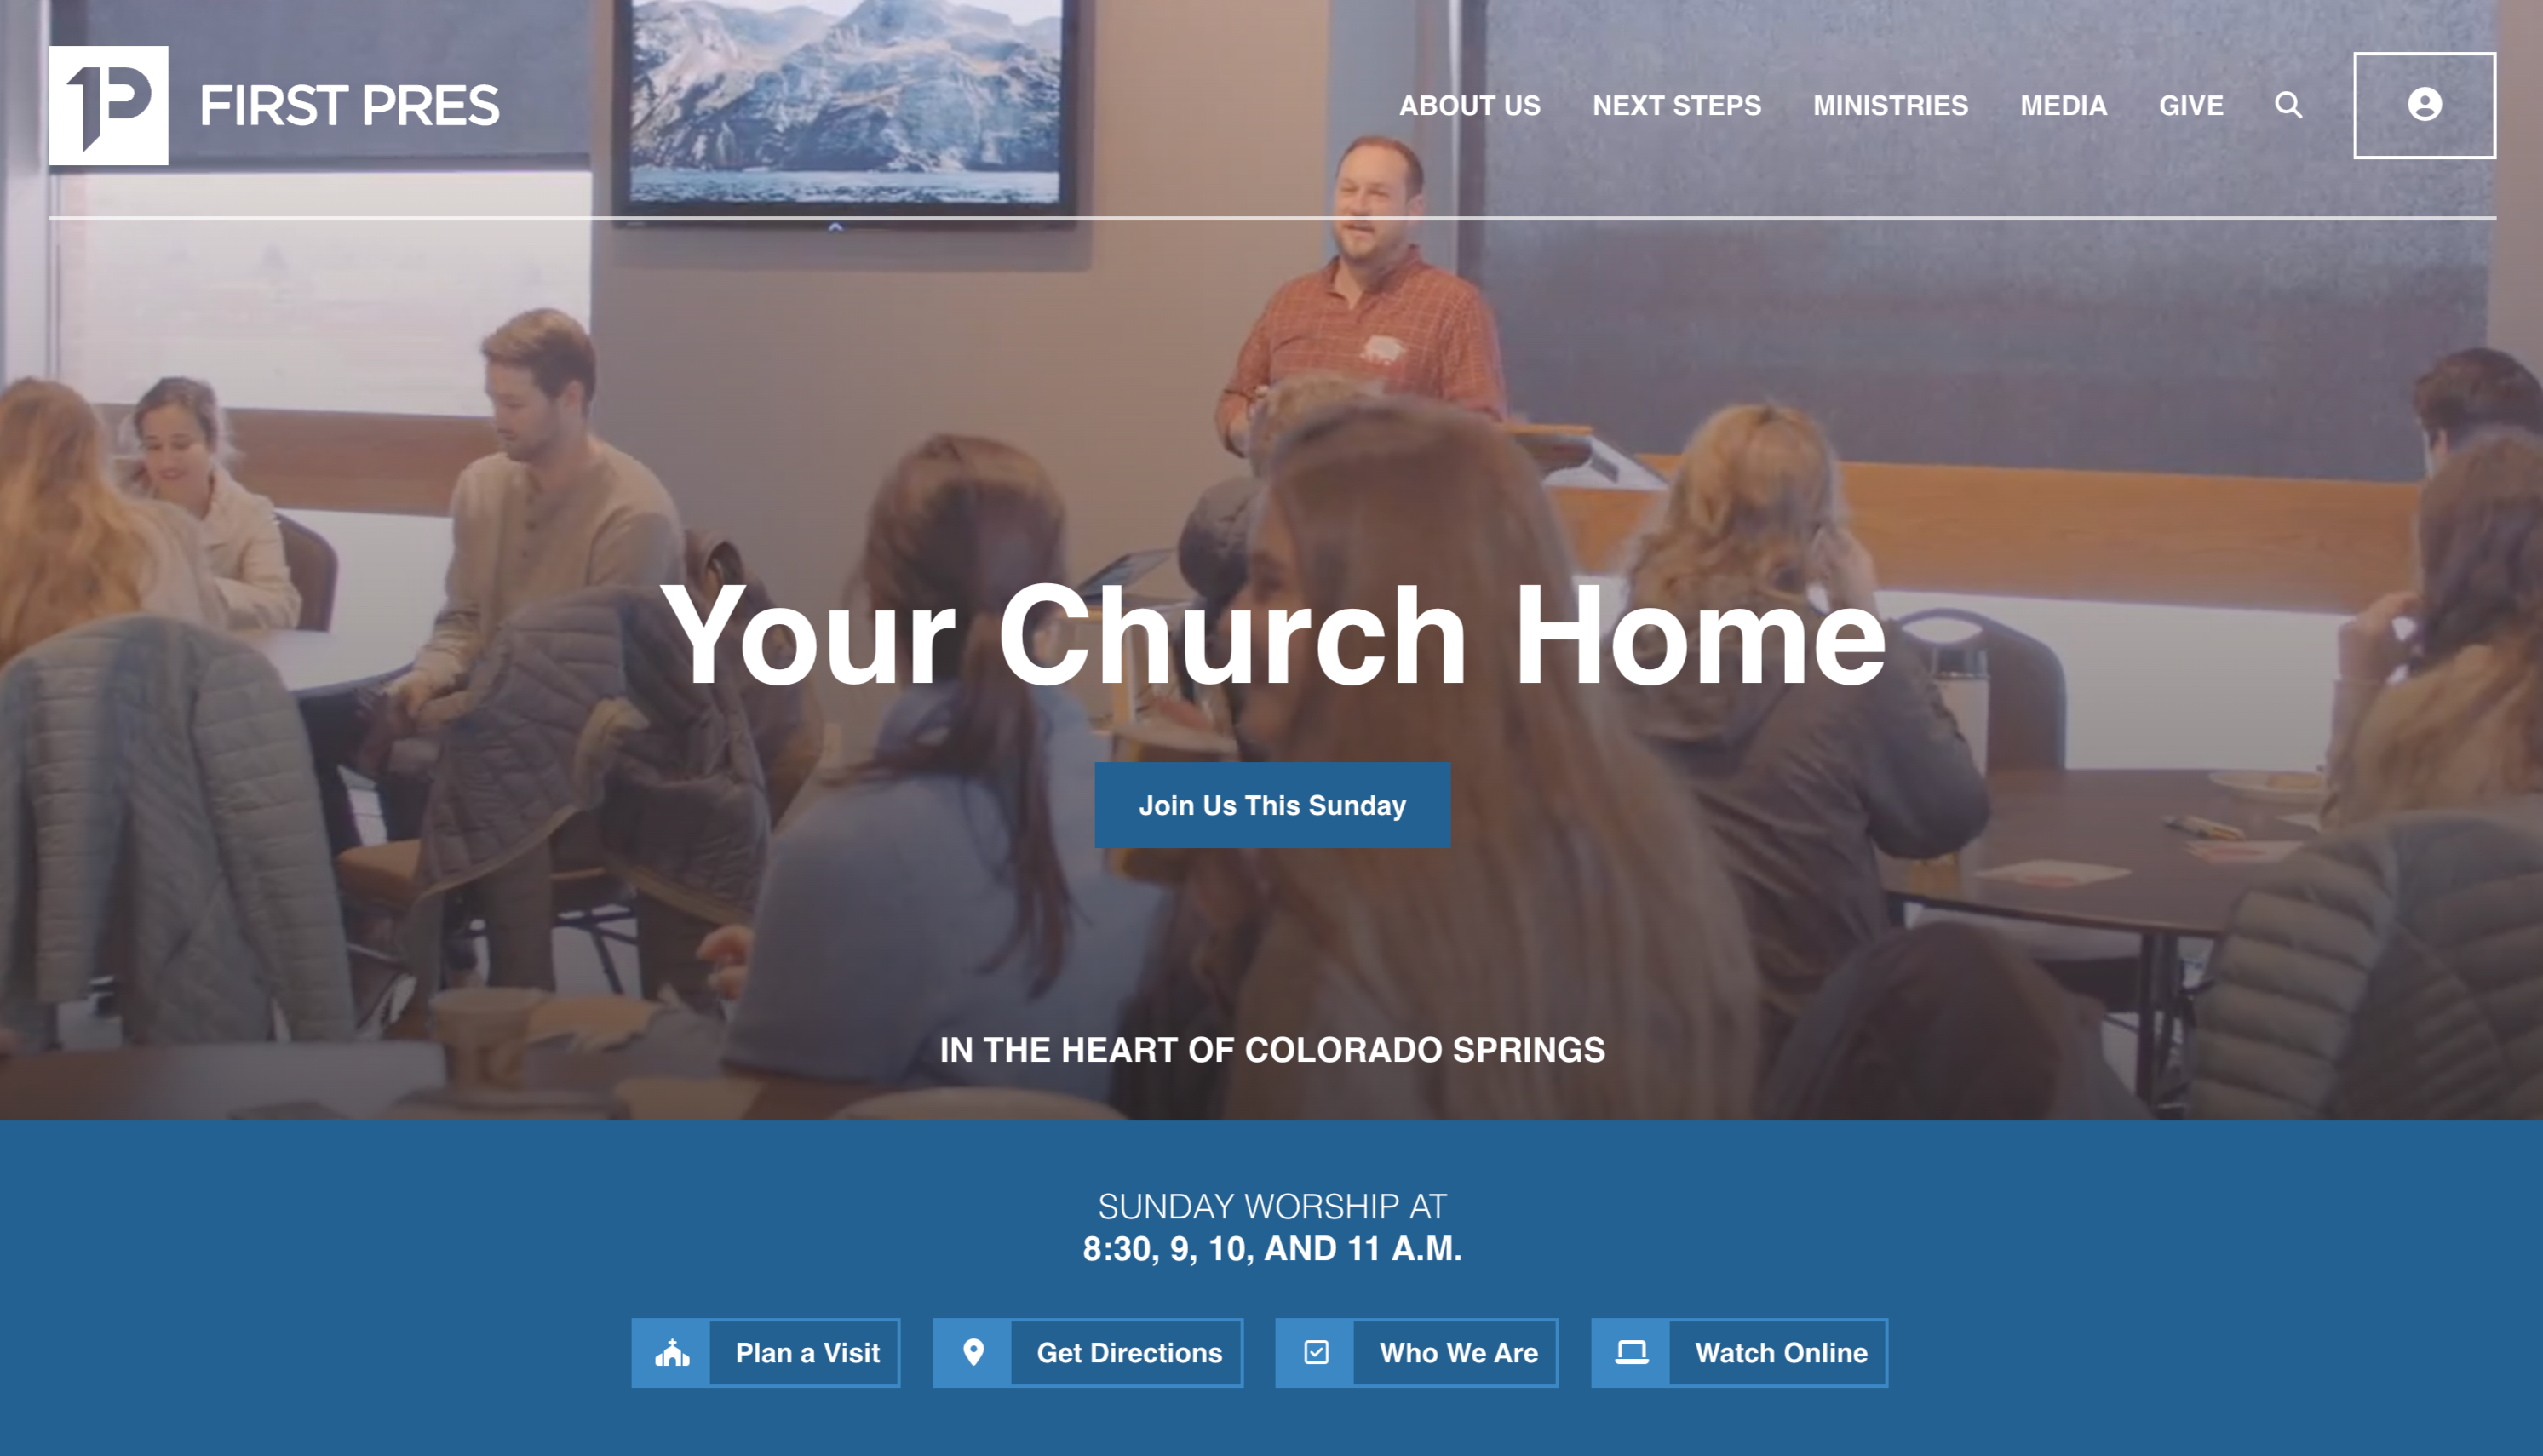 Website image from First Presbyterian Church located in Colorado Springs, CO.